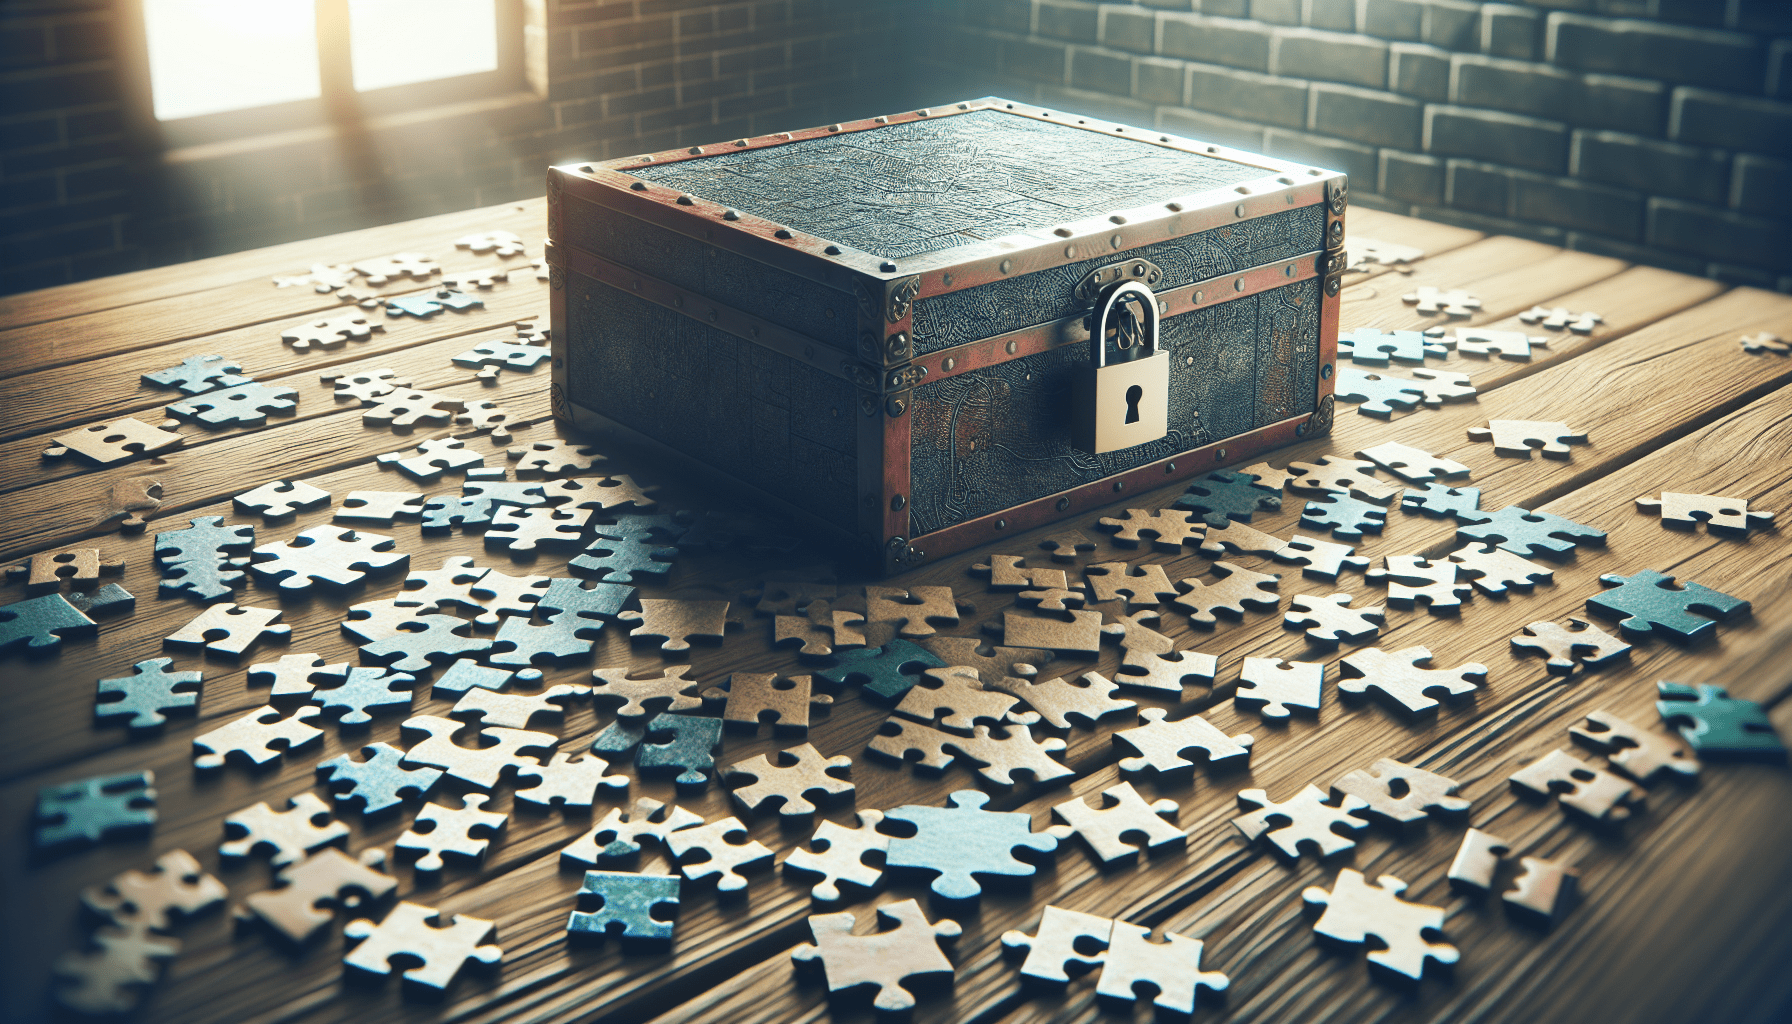 How Many Puzzles Does The Average Escape Room Have?